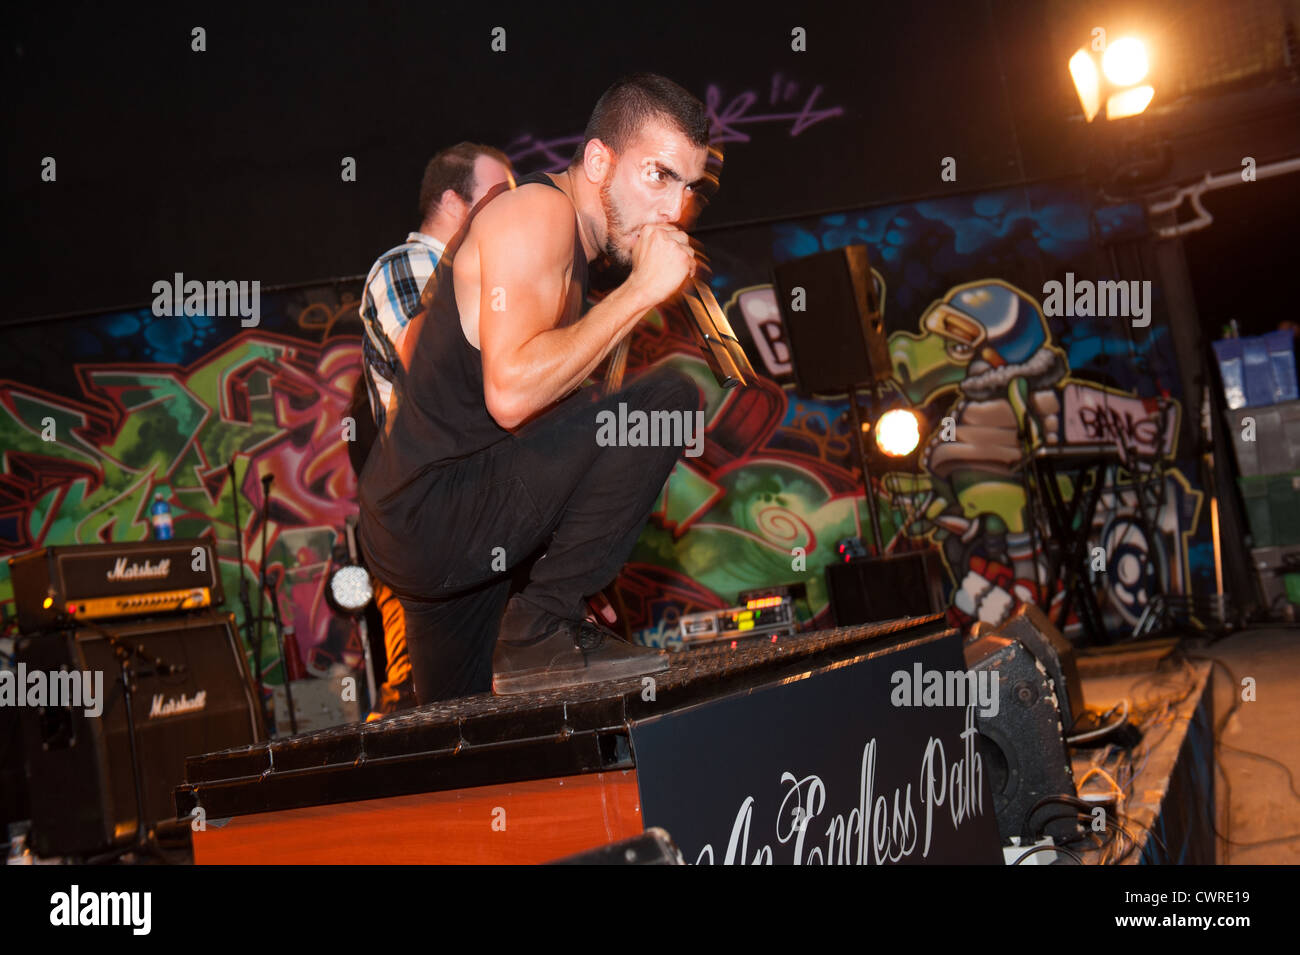 July 28, 2012 – Canary Islands, Spain: An Endless Path from Gran Canaria, performing during Hard Skull Fest Stock Photo